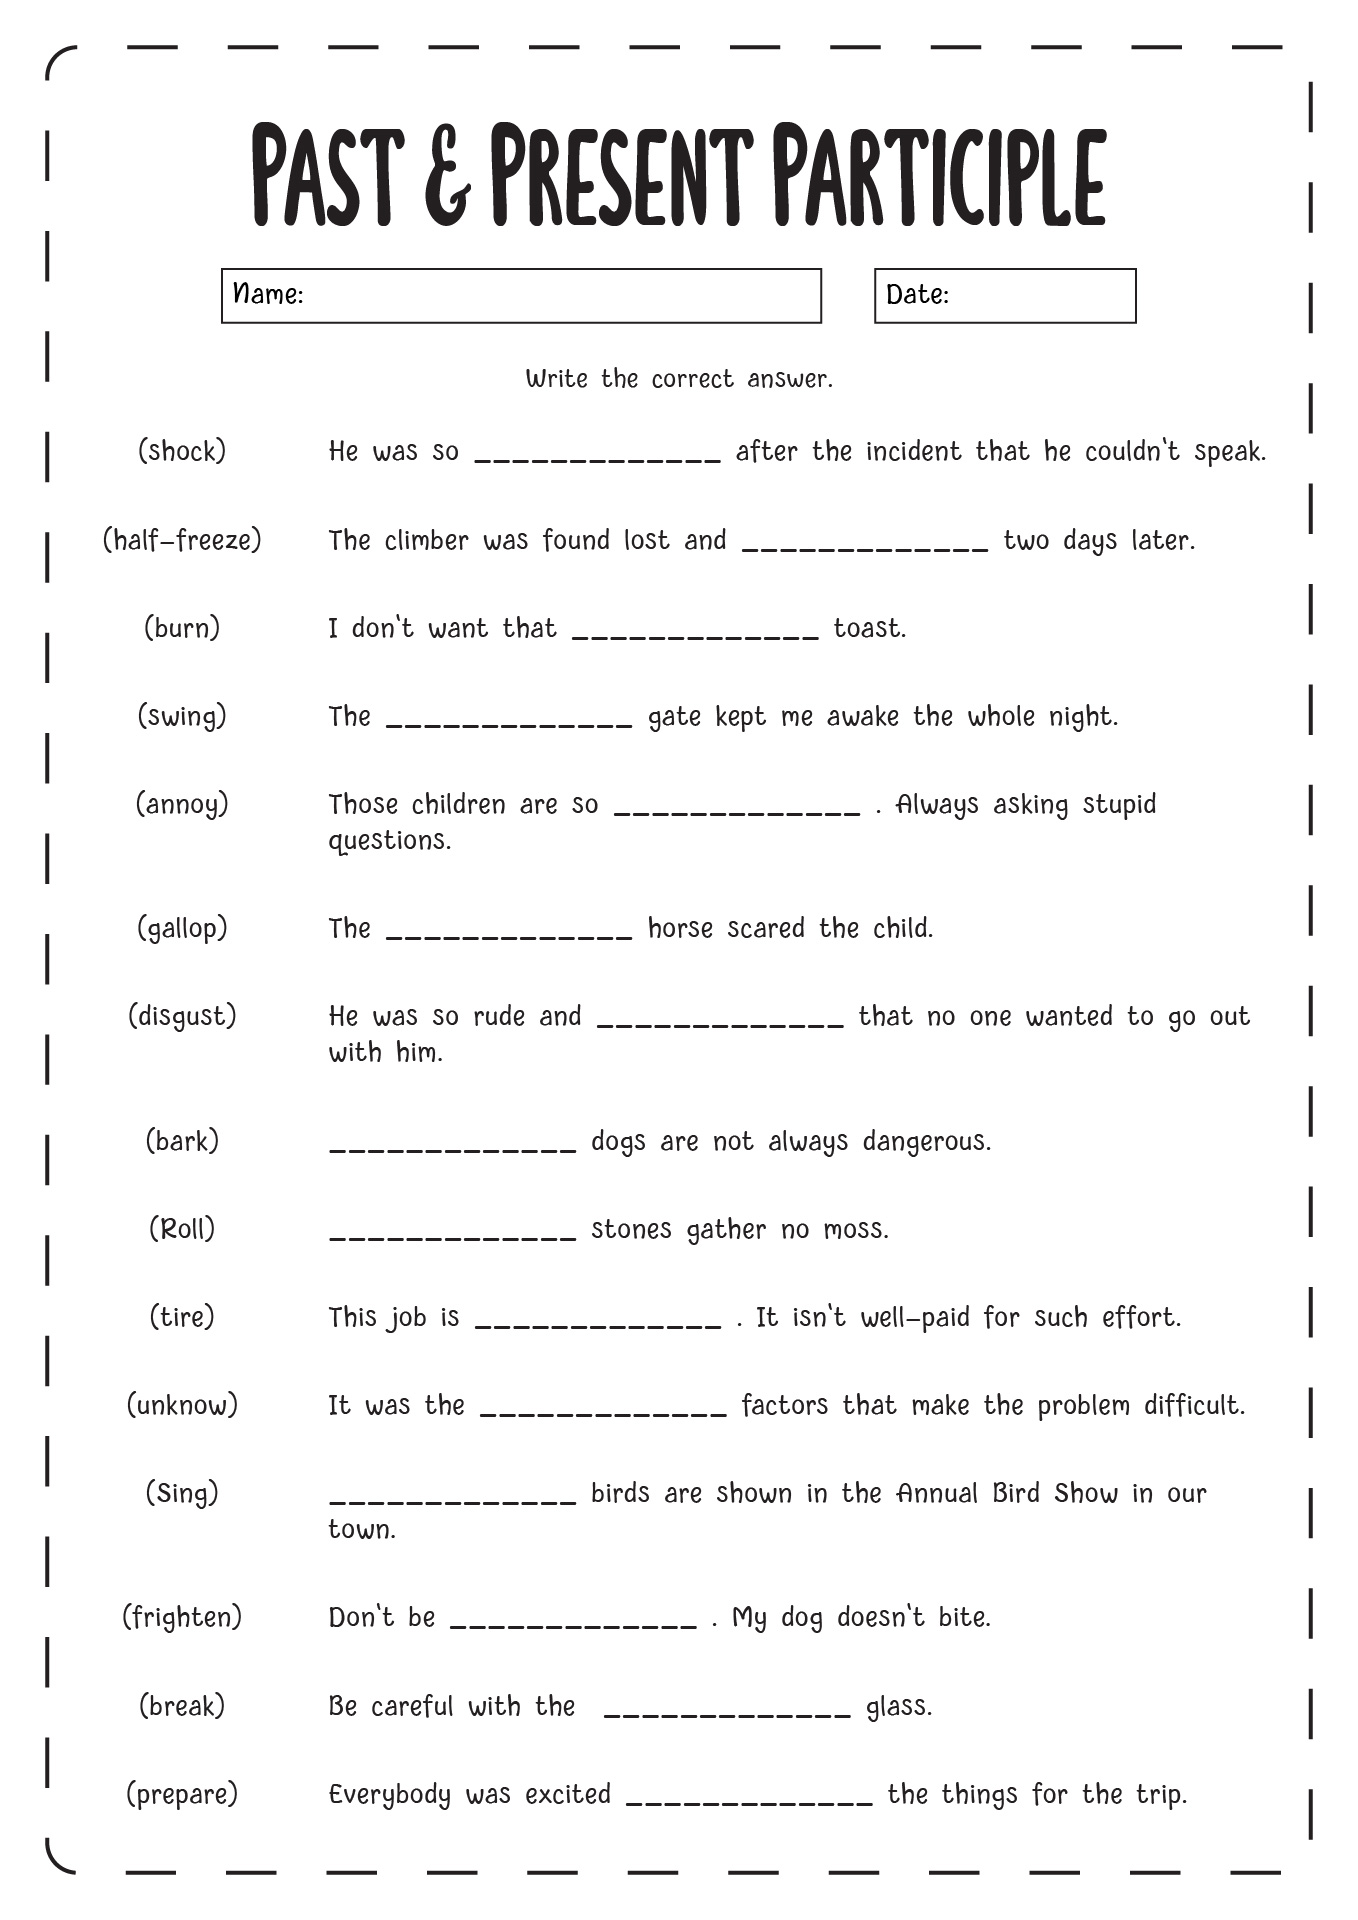 Past and Present Participle Worksheet Image